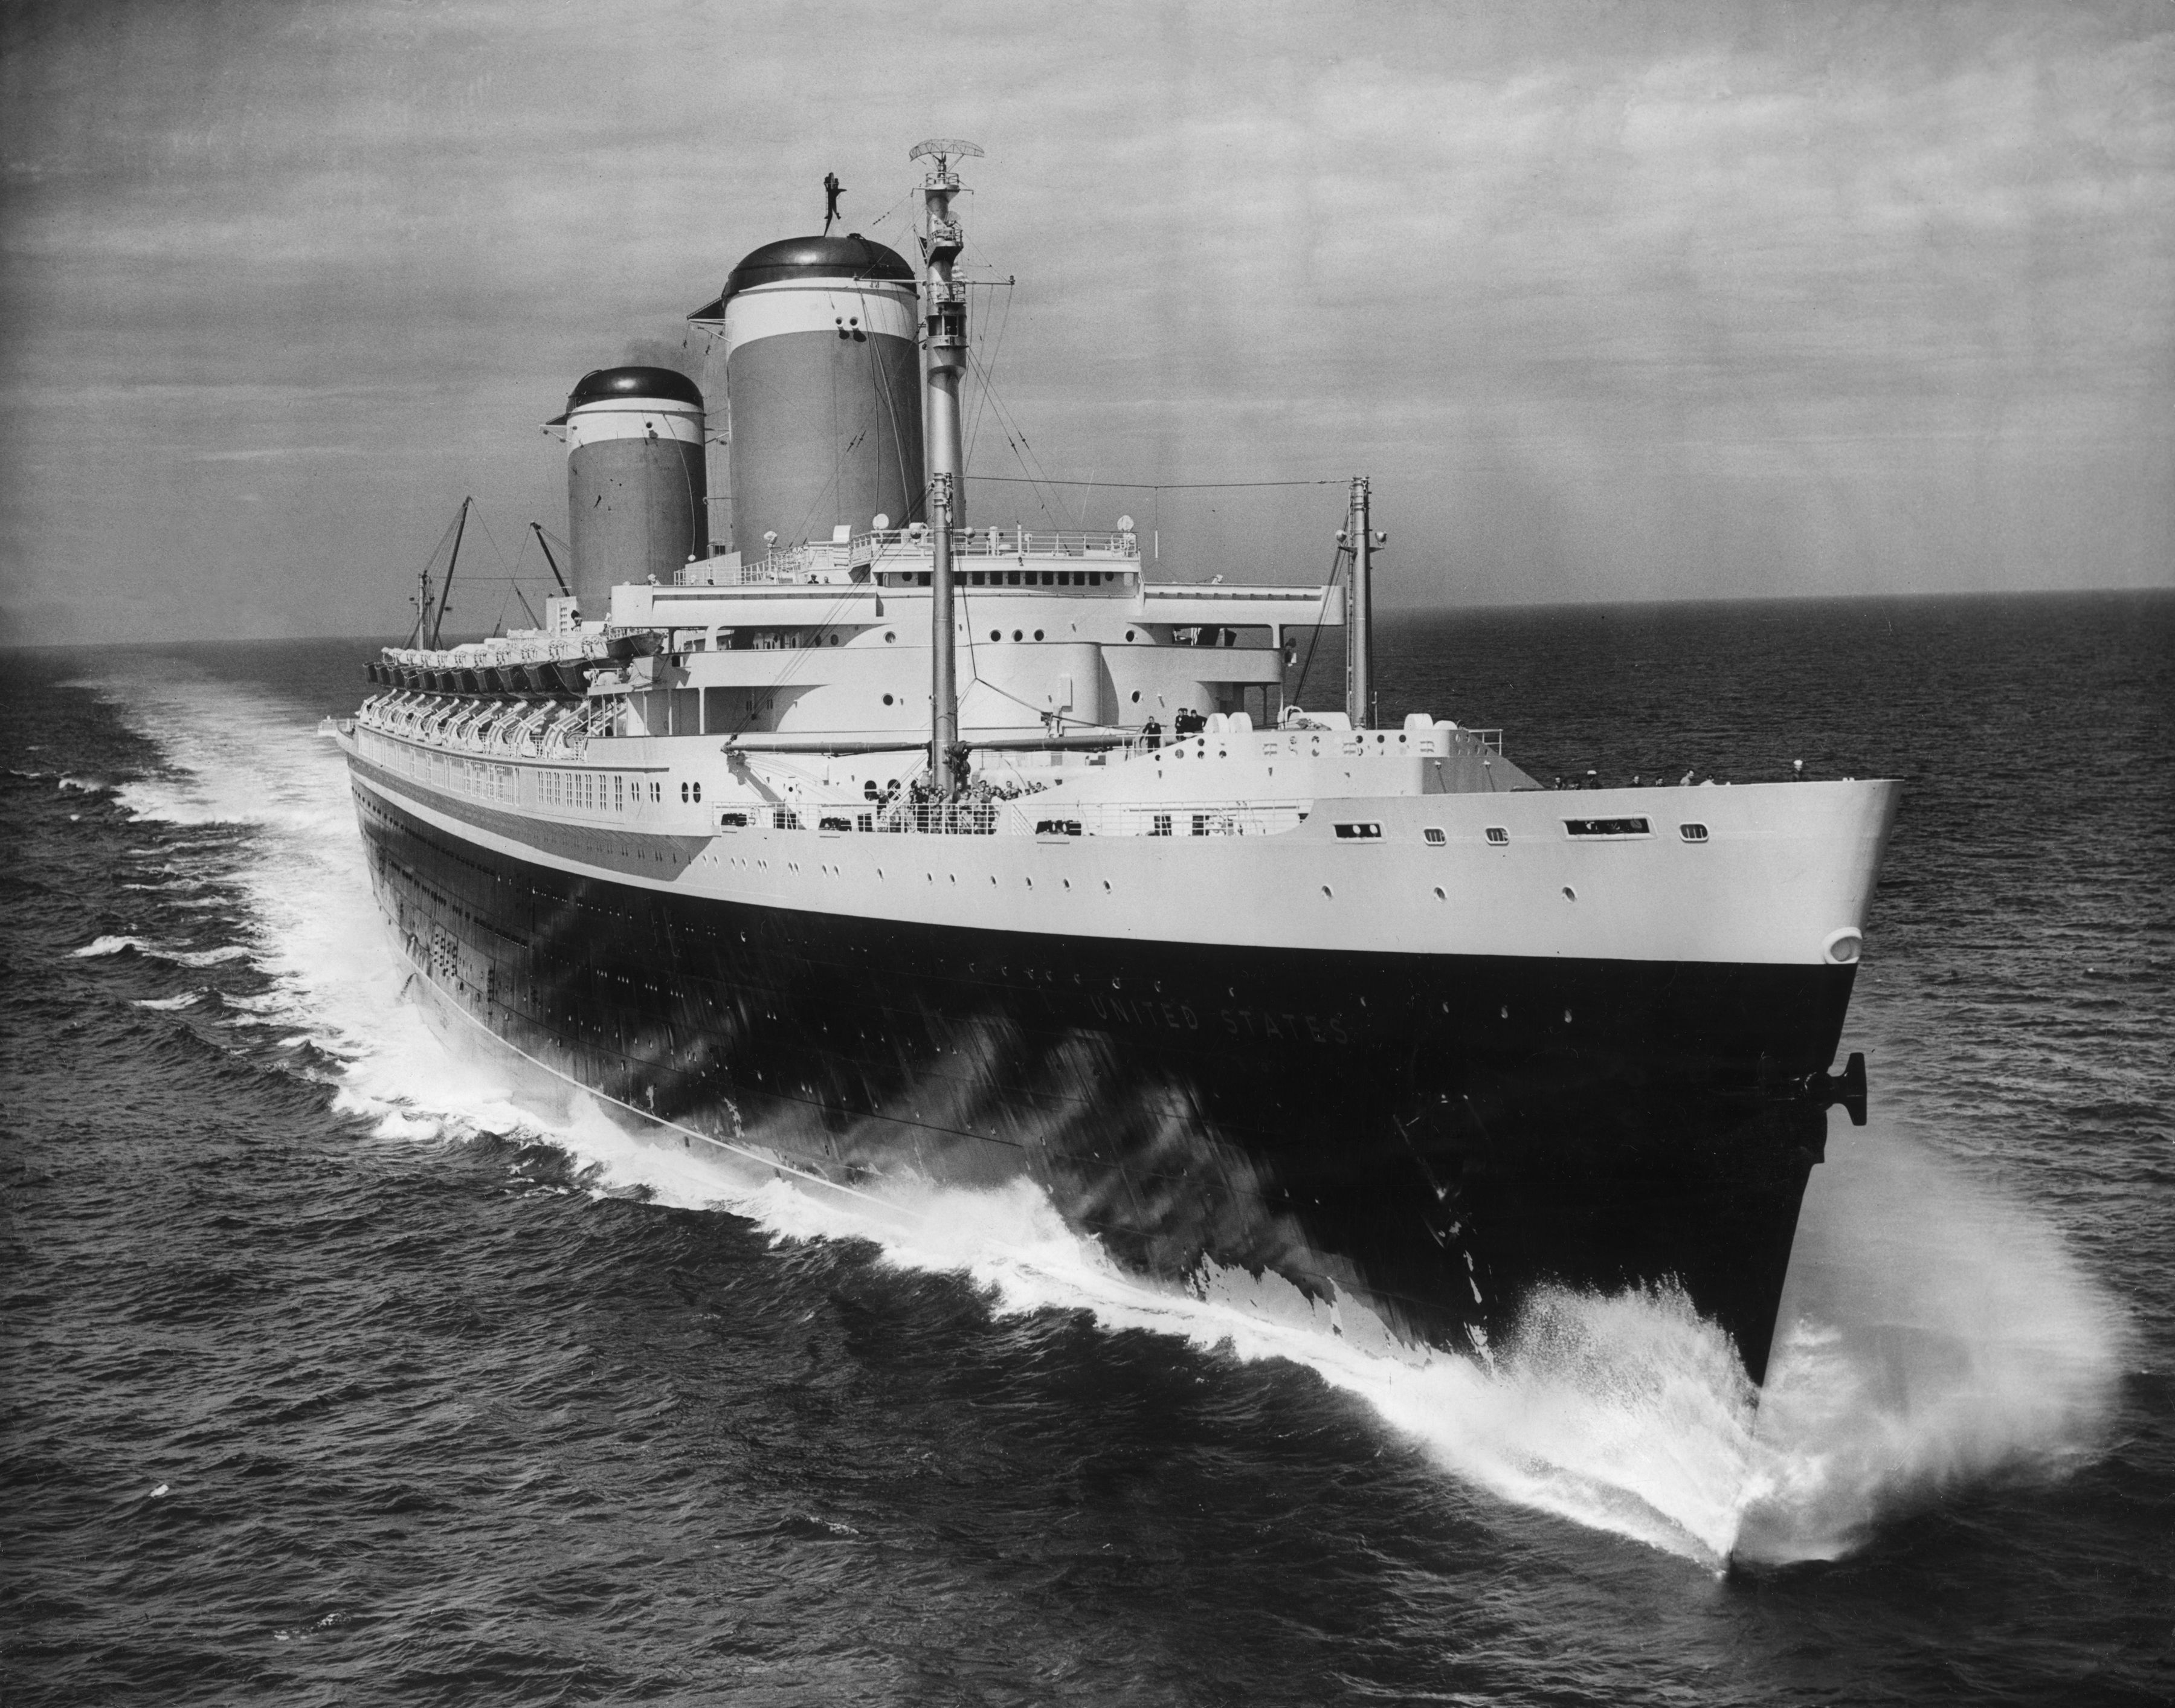 General 3600x2827 liner SS United States ship 1950s monochrome